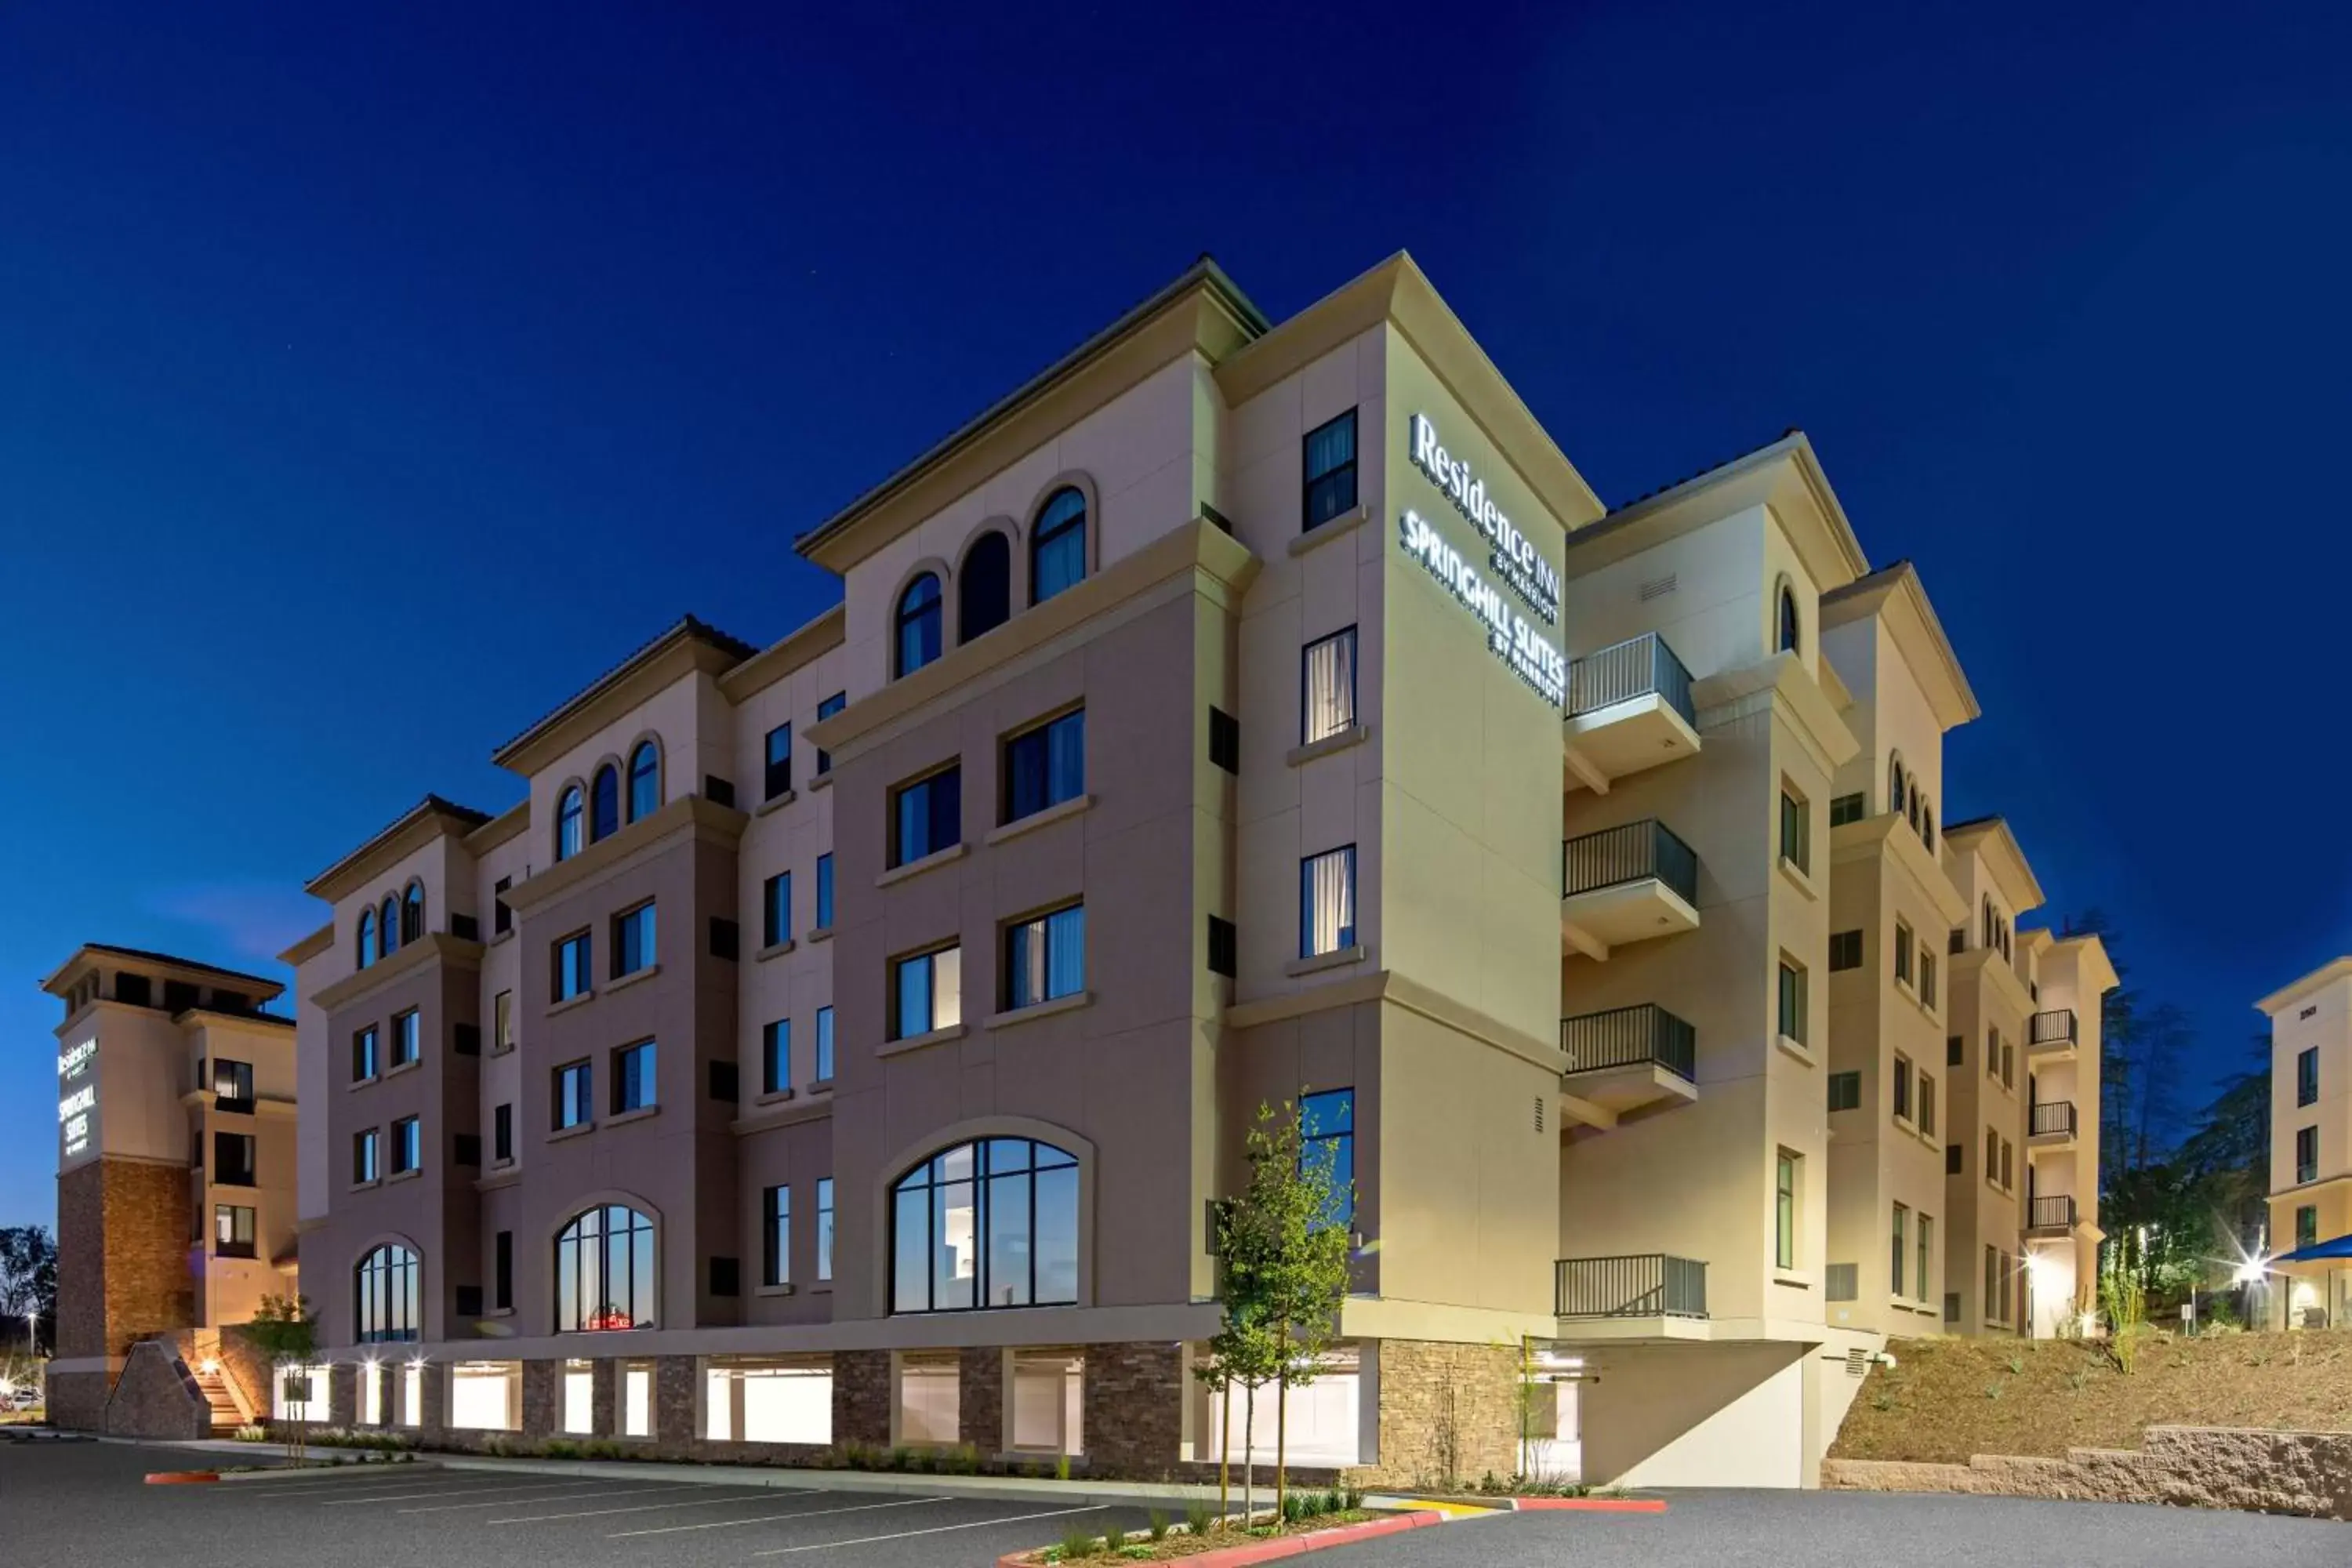 Property Building in Residence Inn by Marriott Valencia